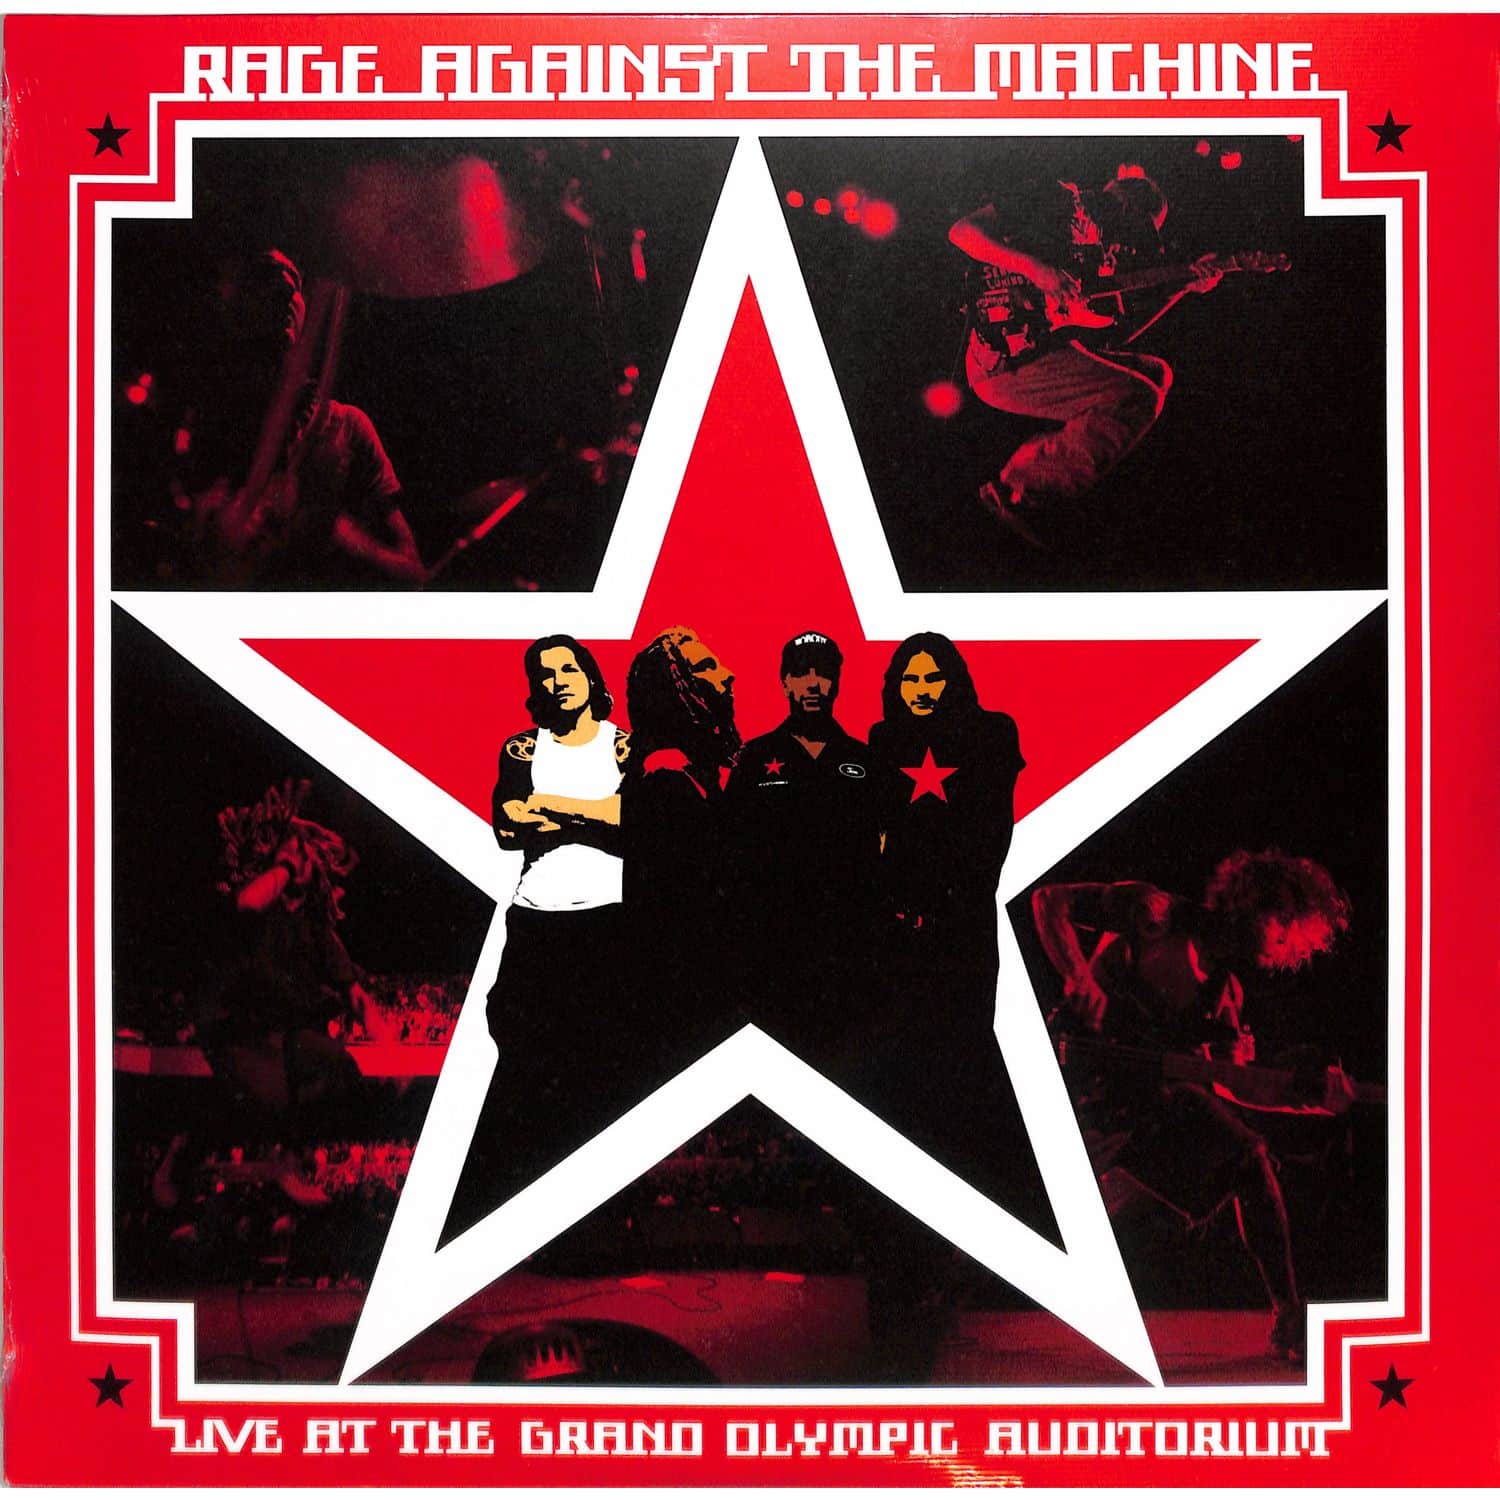 Rage Against The Machine - LIVE AT THE GRAND OLYMPIC AUDITORIUM 